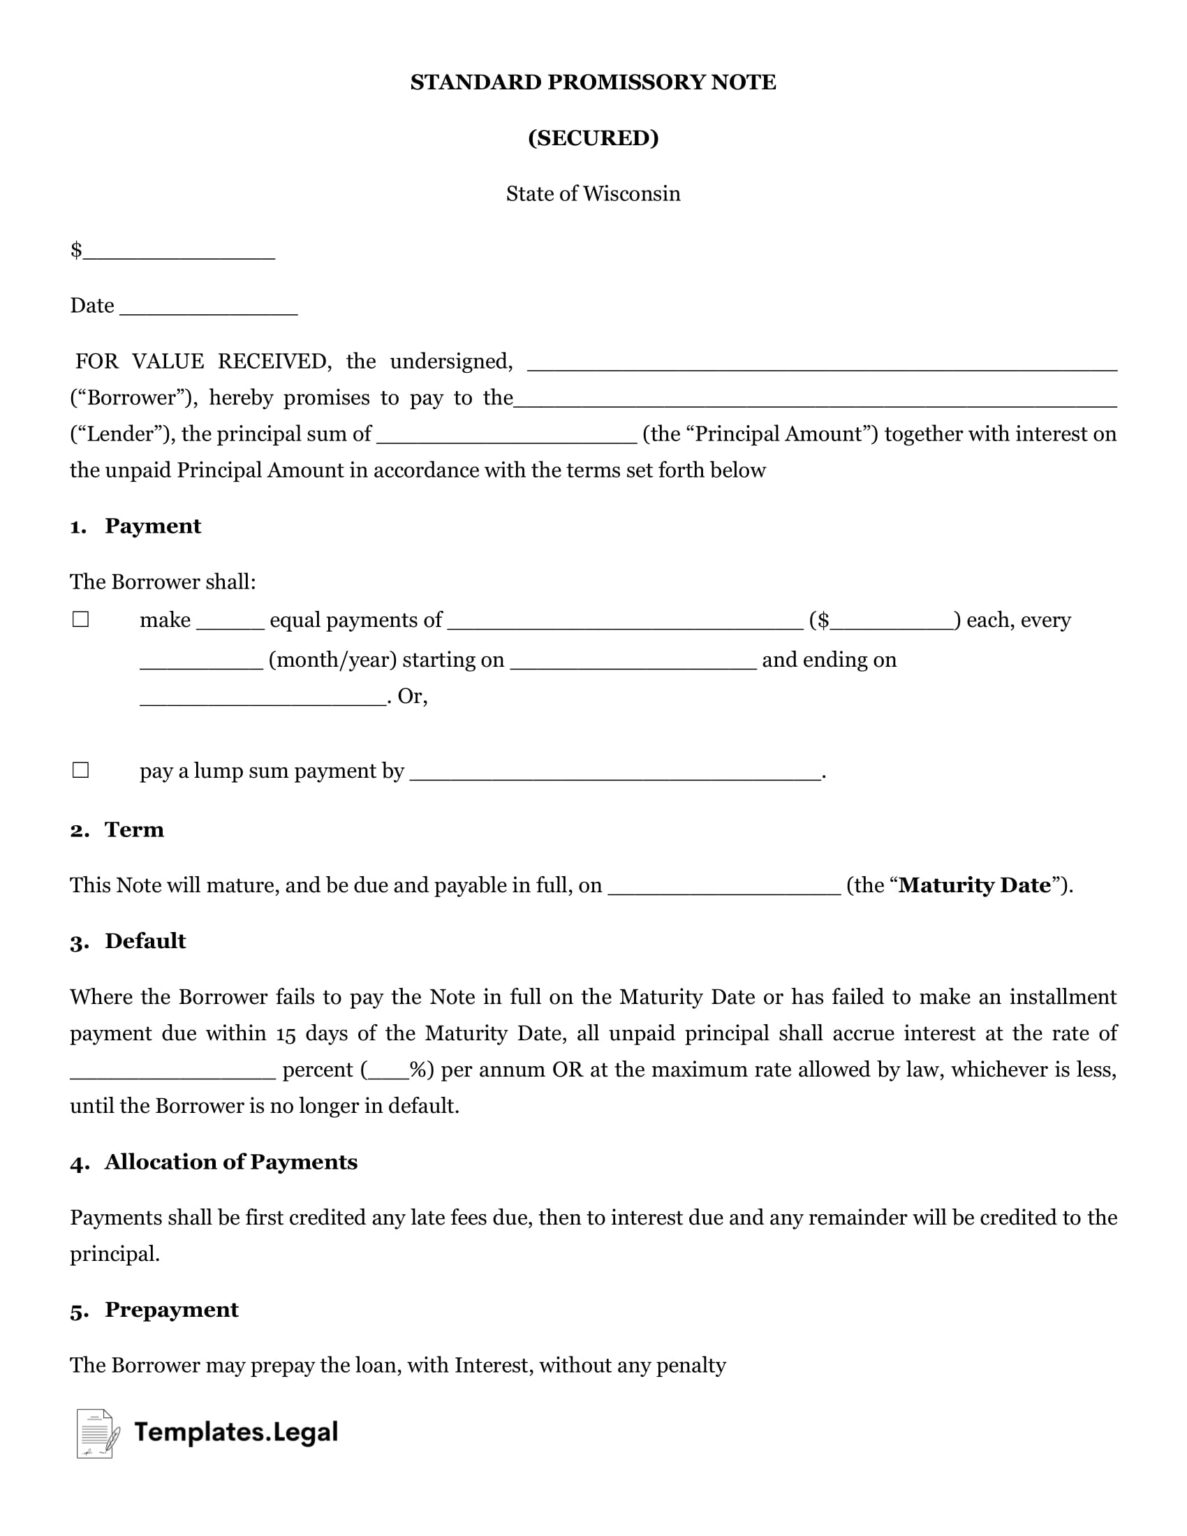 wisconsin-promissory-note-templates-free-word-pdf-odt